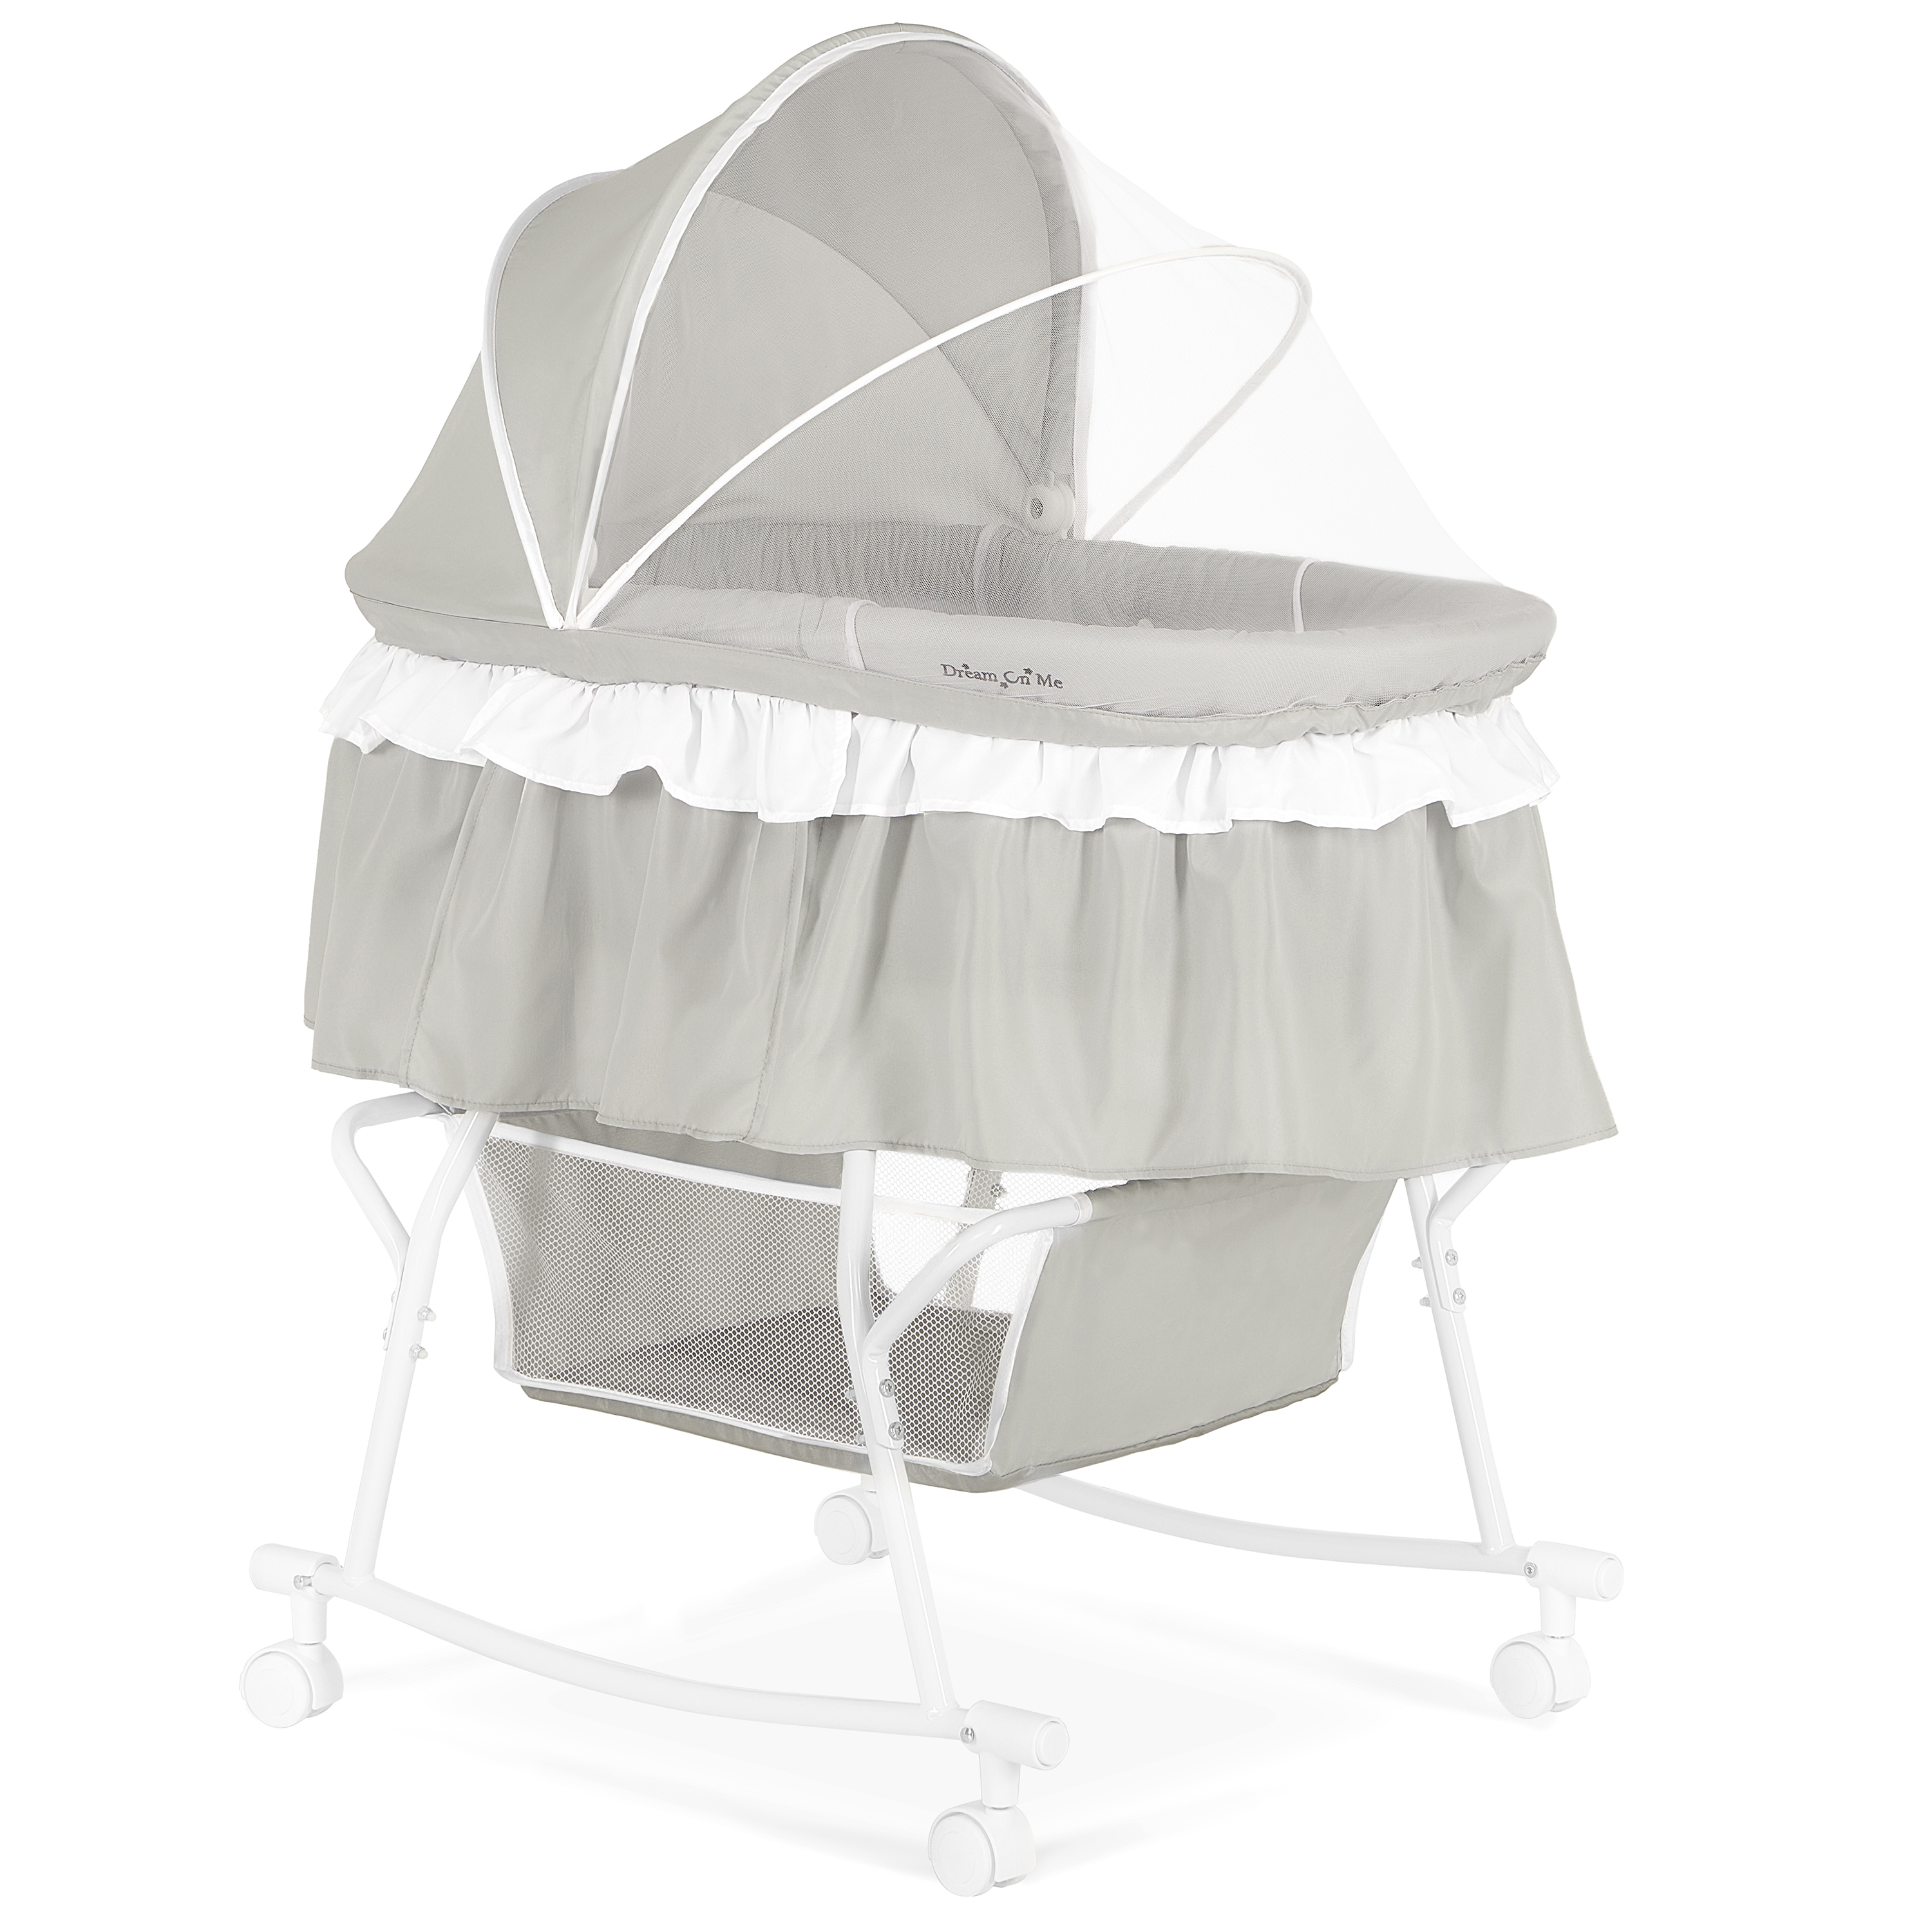 Dream On Me Lacy Portable 2-in-1 Bassinet & Cradle in Light Grey, Lightweight Baby Bassinet - image 1 of 26